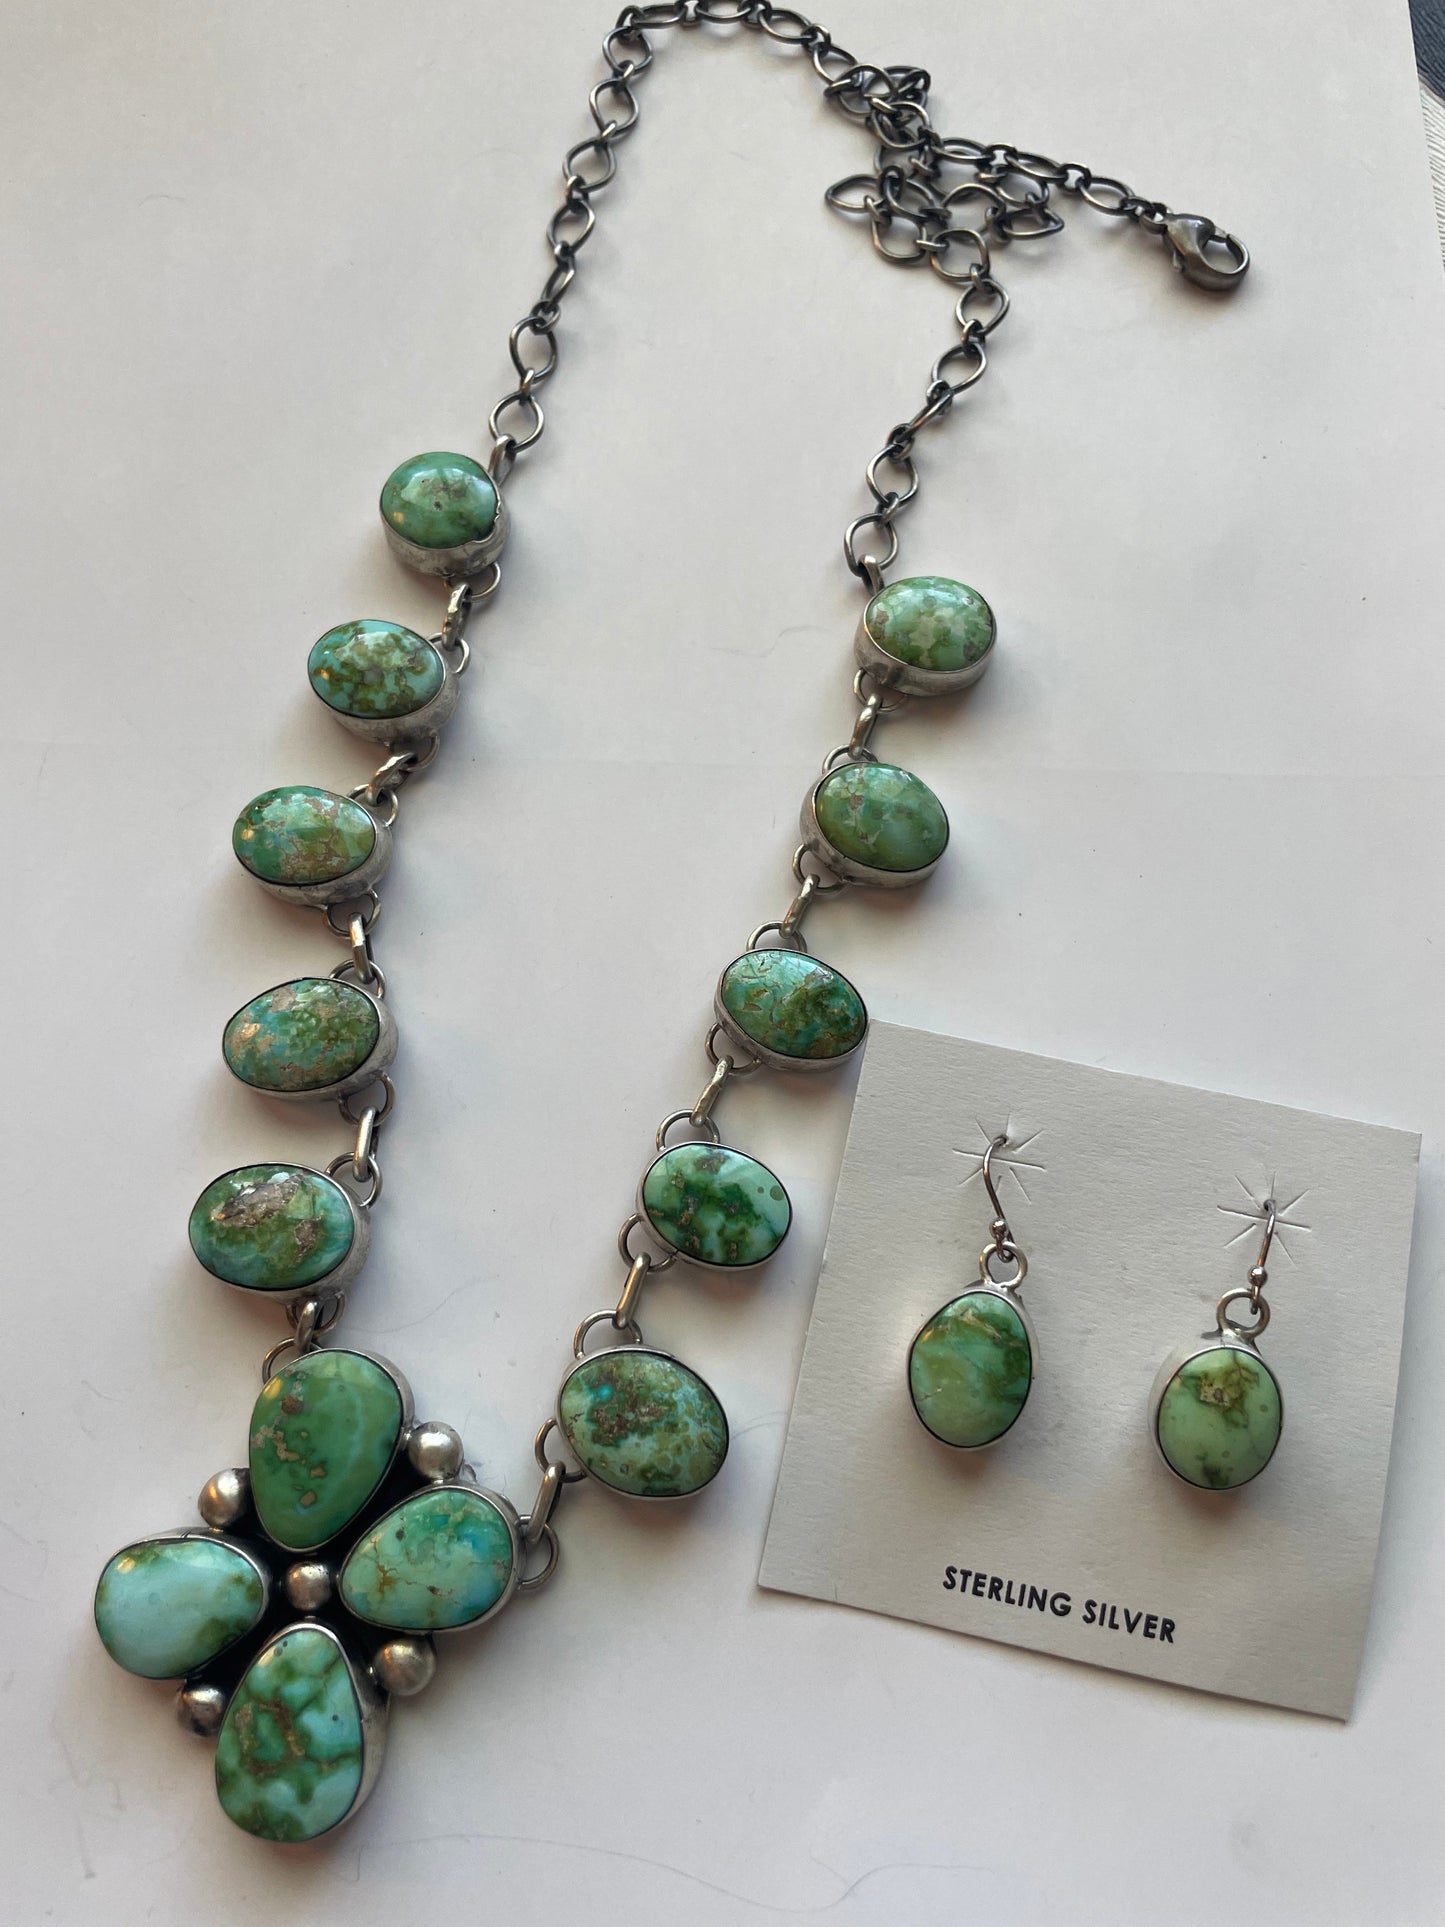 Beautiful Navajo Sterling Silver Sonoran Mountain Turquoise Necklace & Earring Set Signed B Johnson